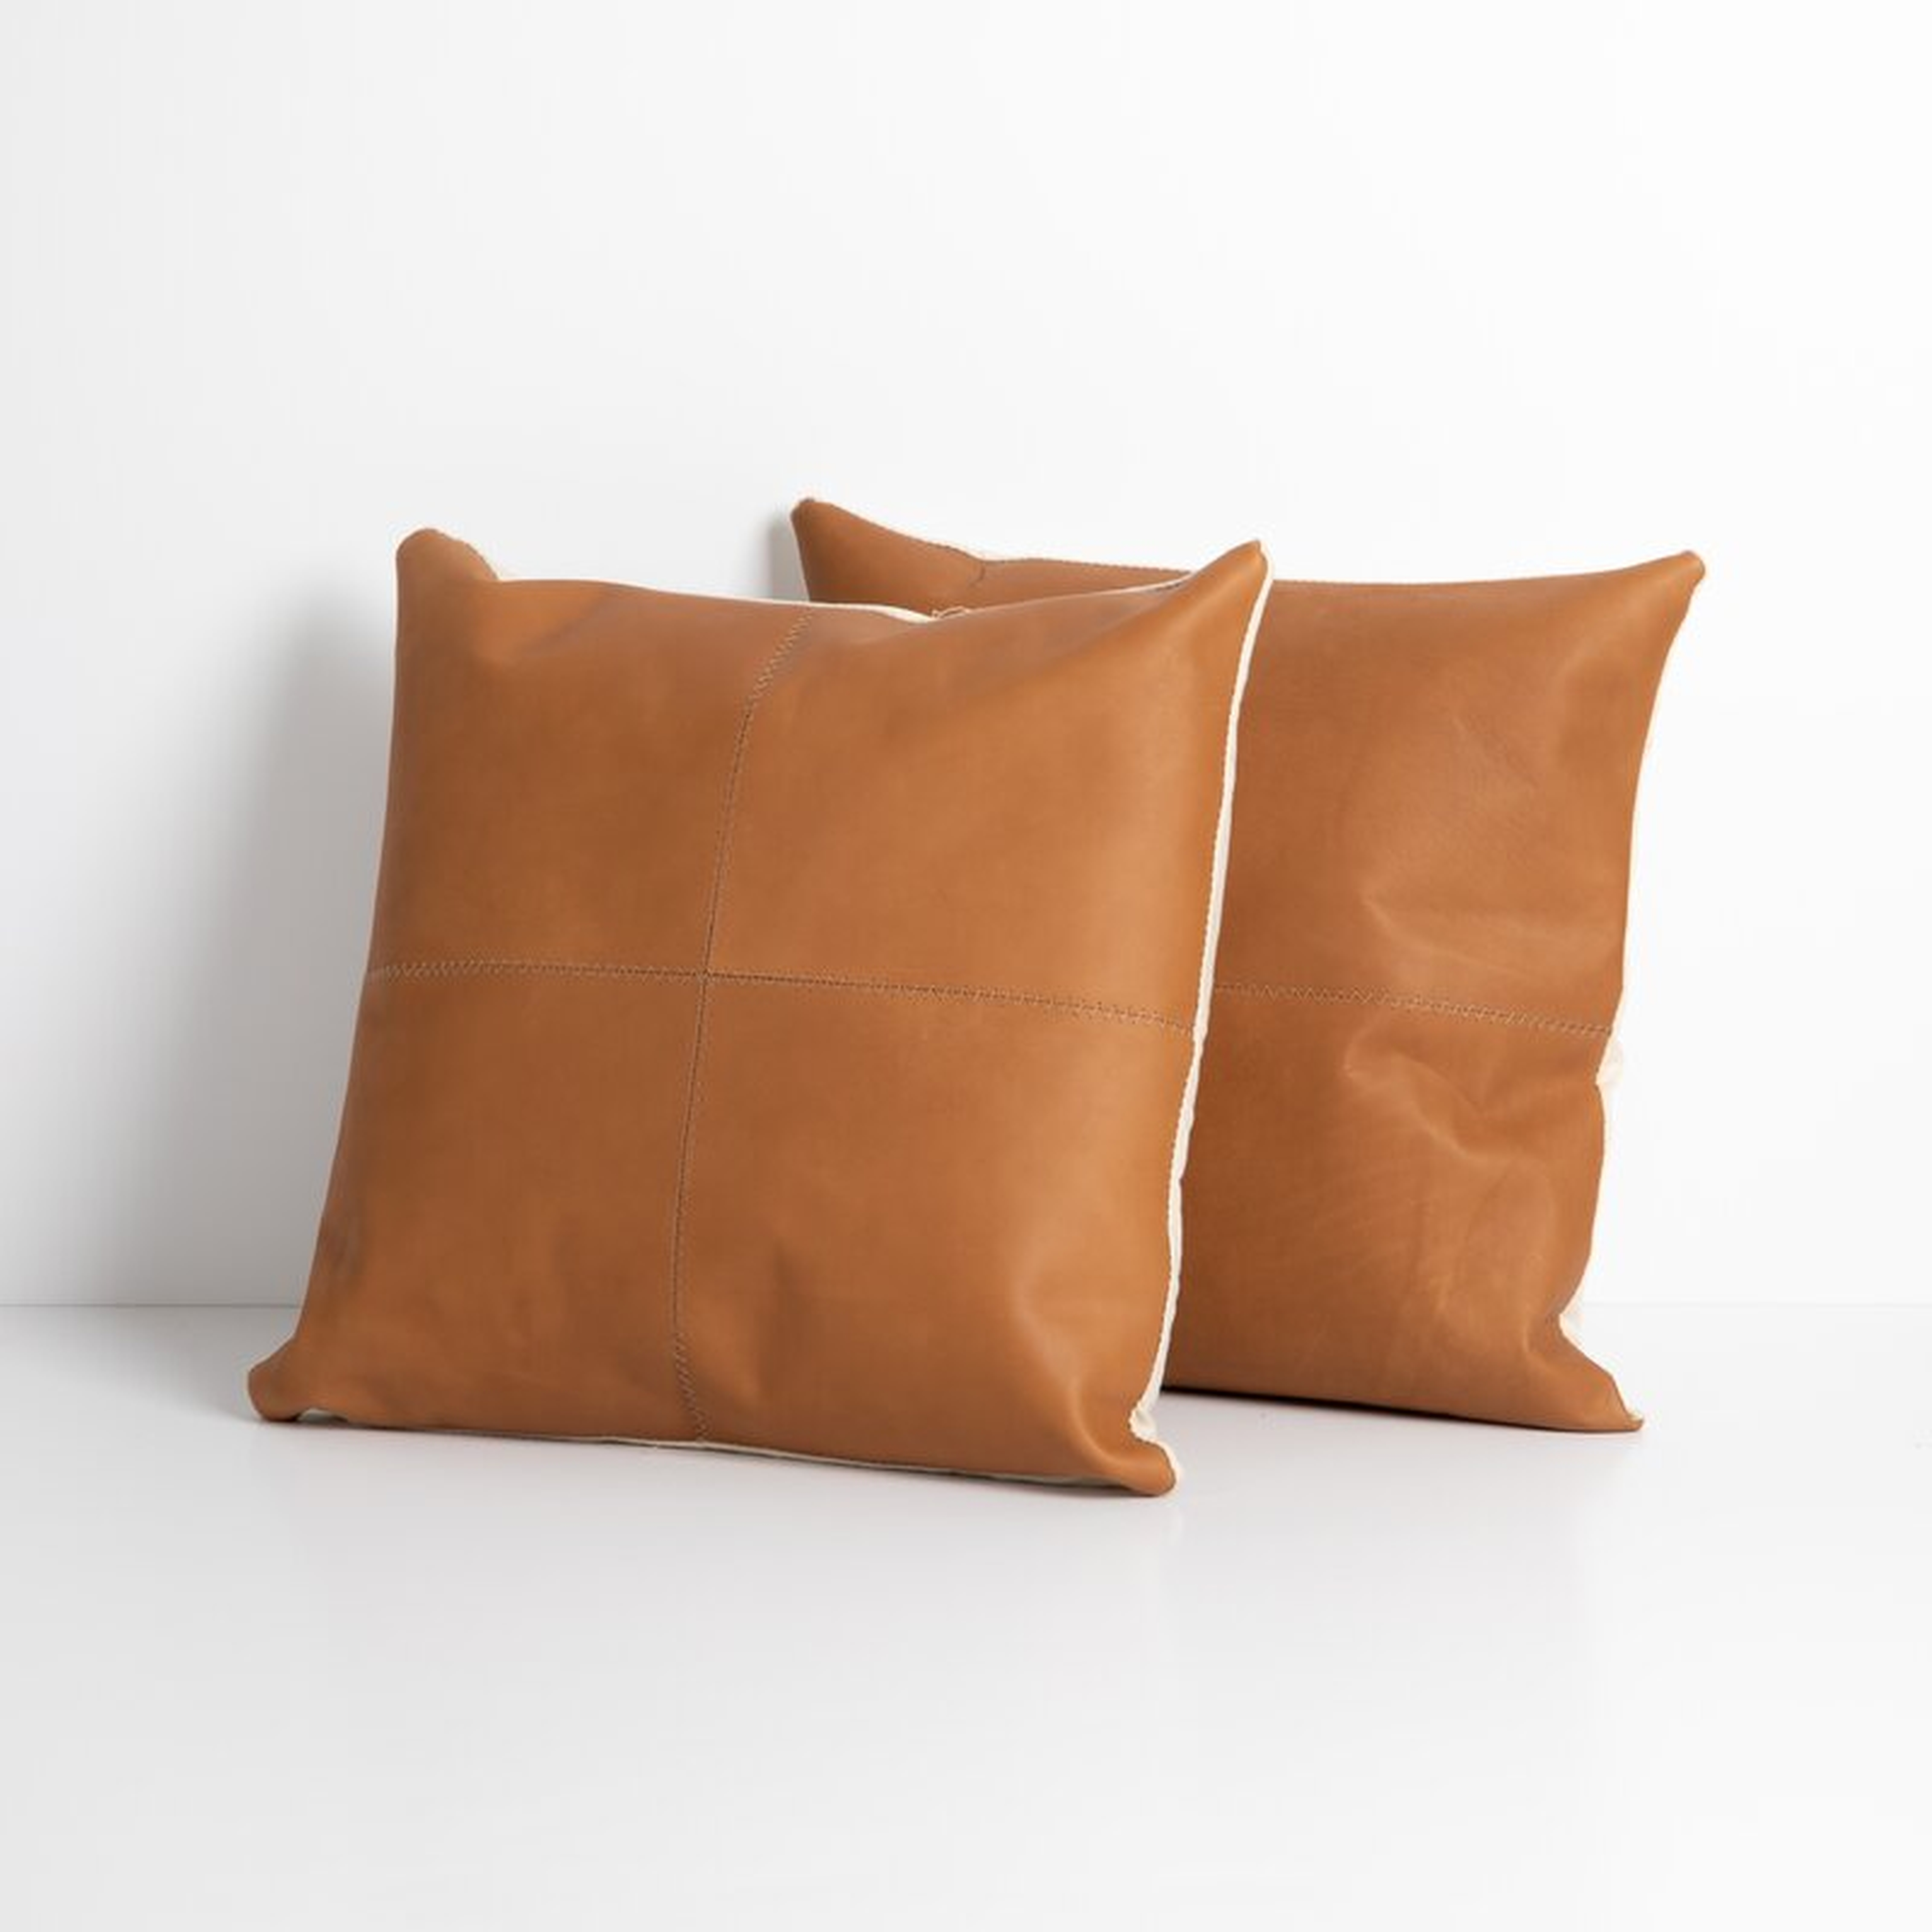 Four Hands Mateo Square Leather Pillow Cover & Insert Color: Whiskey - Perigold